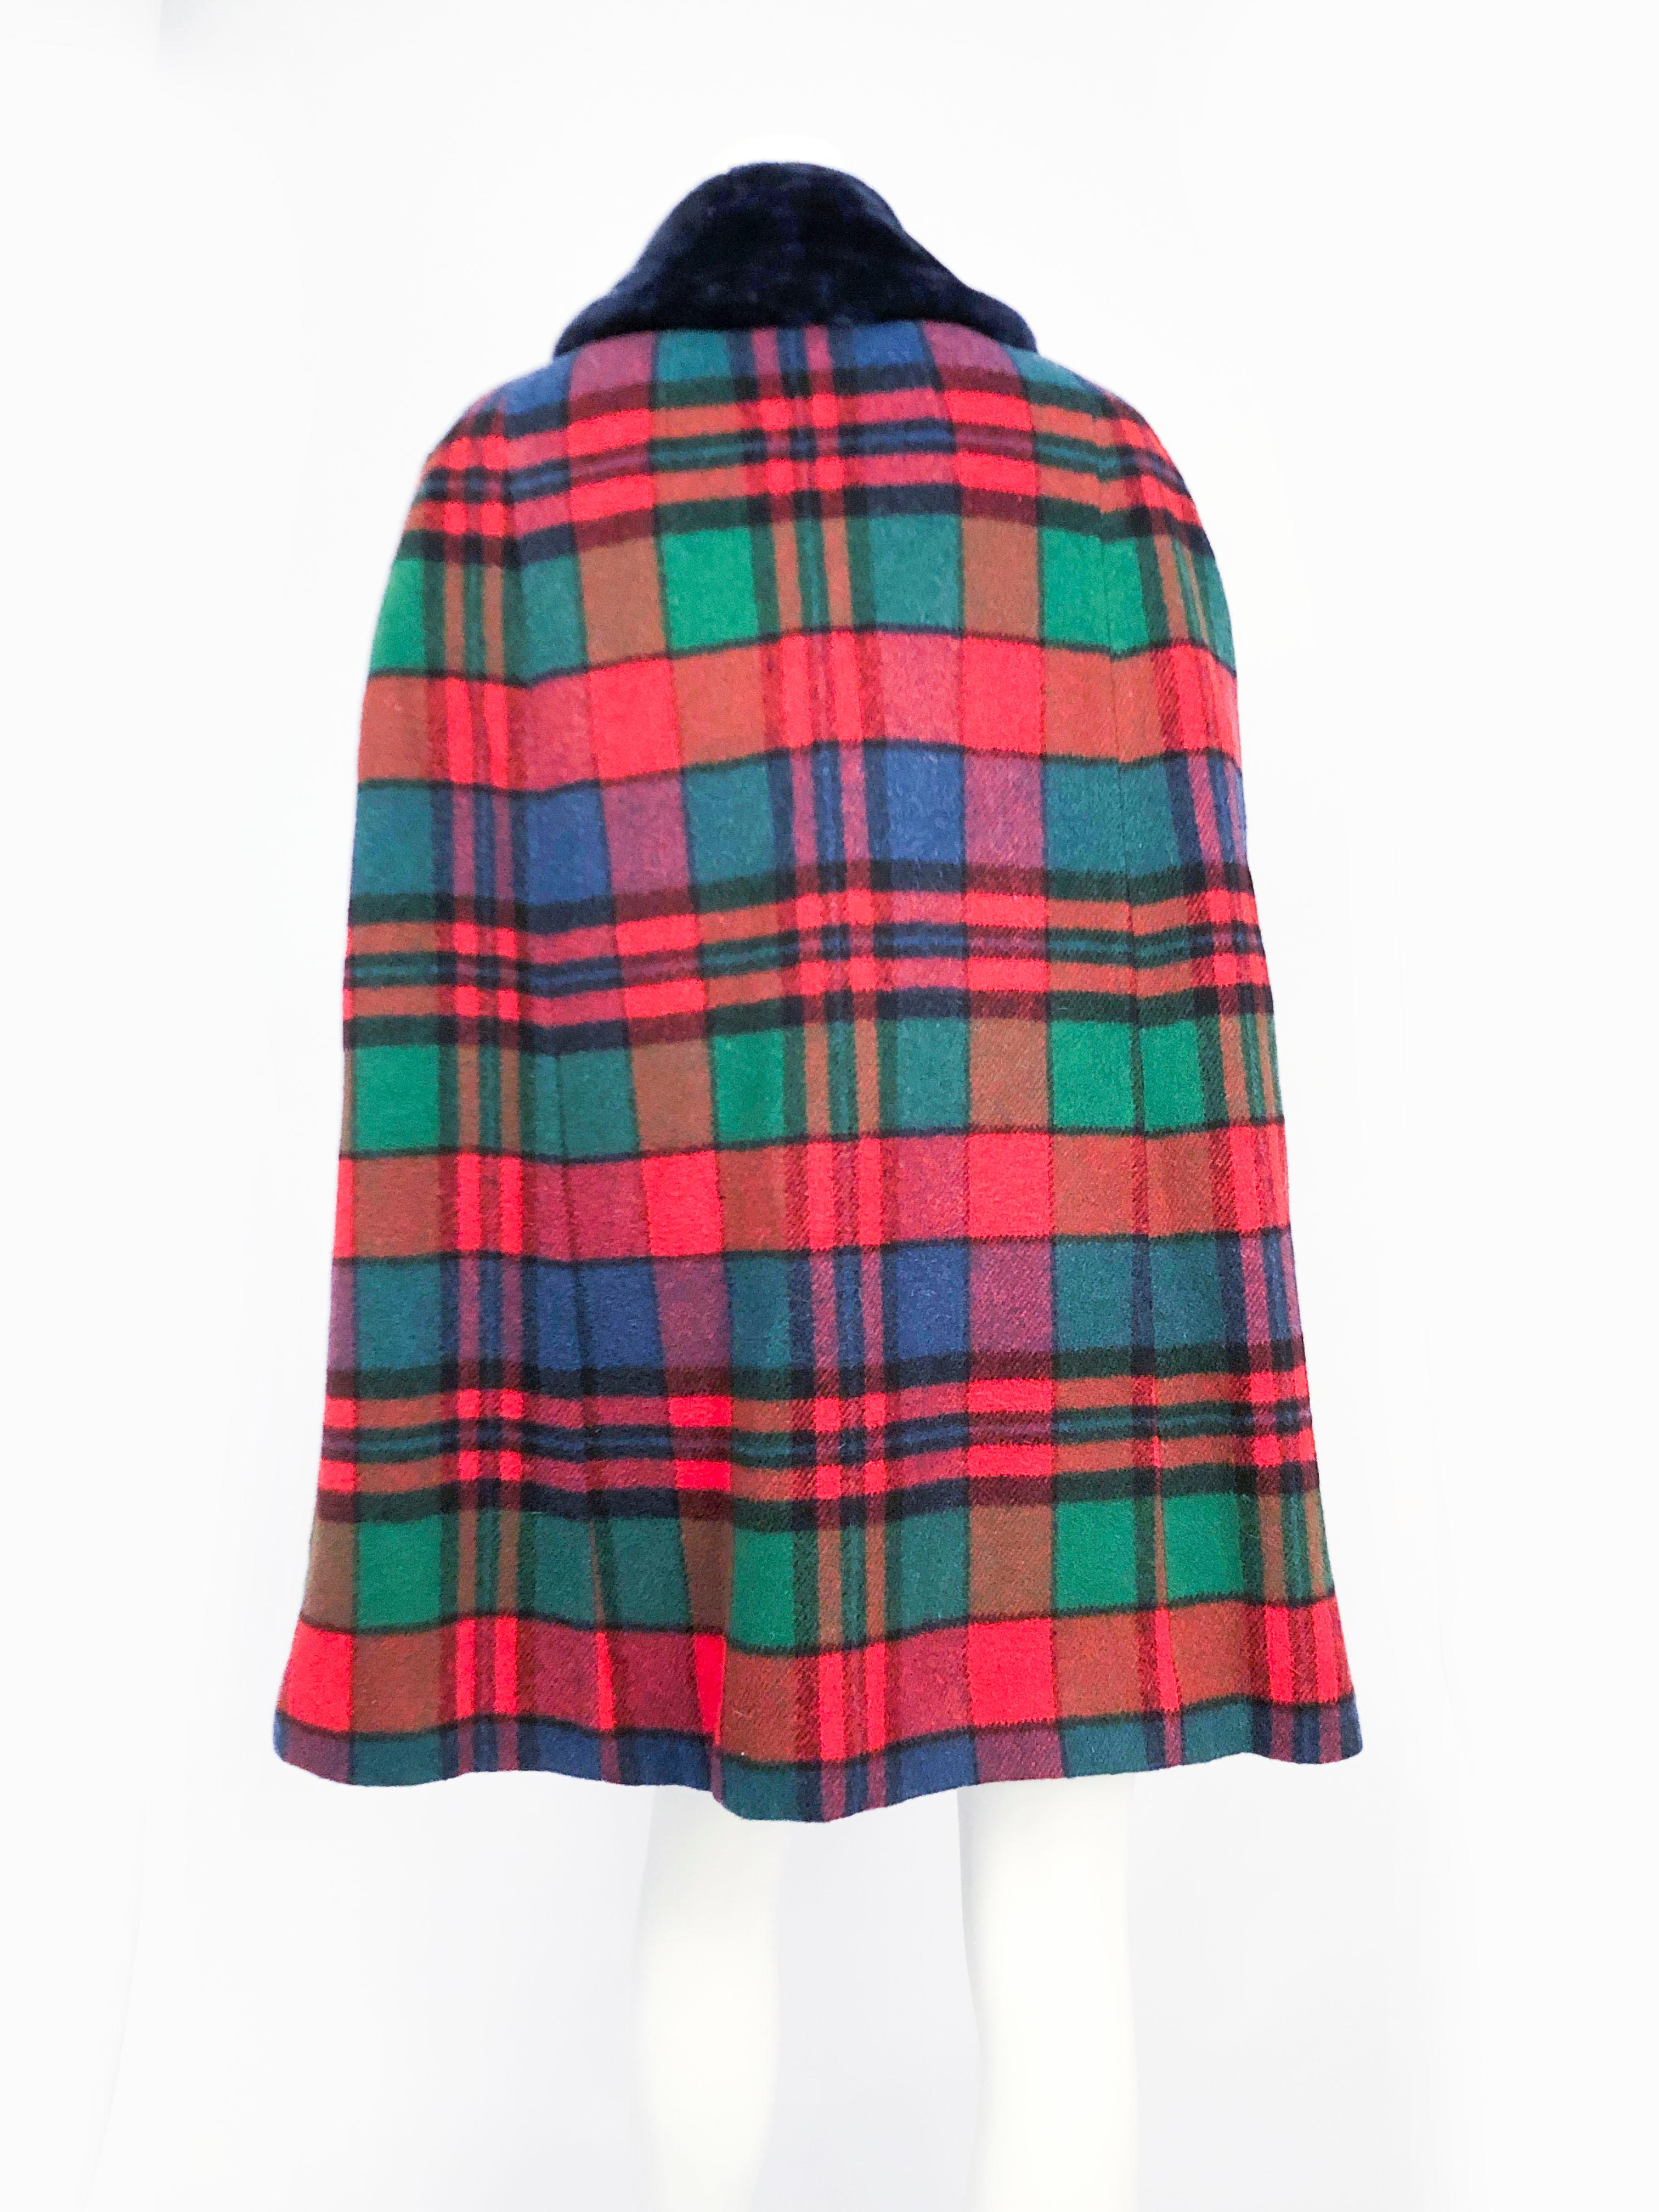 Women's 1960s Plaid Wool Cape with Navy Faux Fur Collar